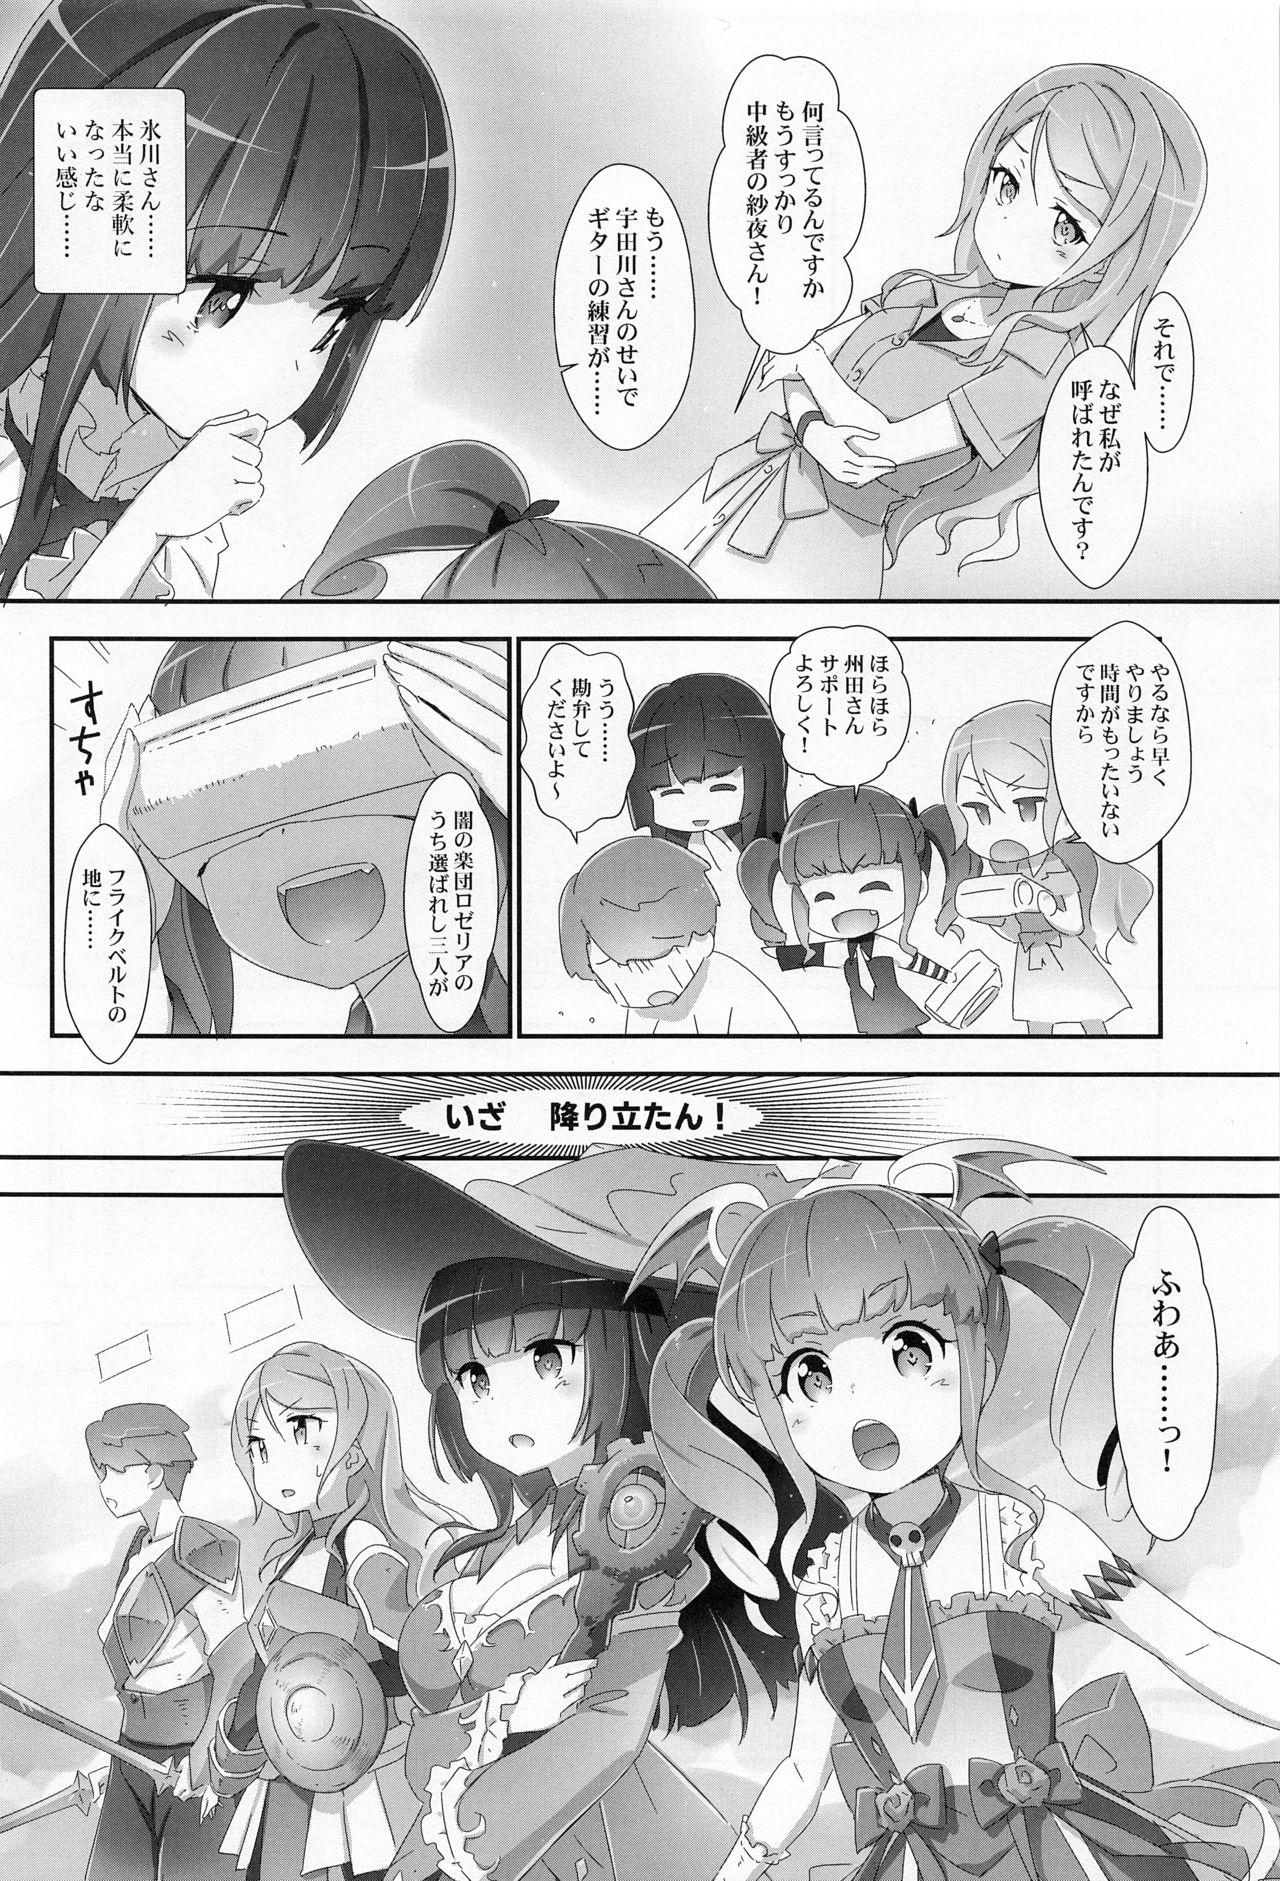 Funny EroYoro? 9 - Bang dream Old - Page 5